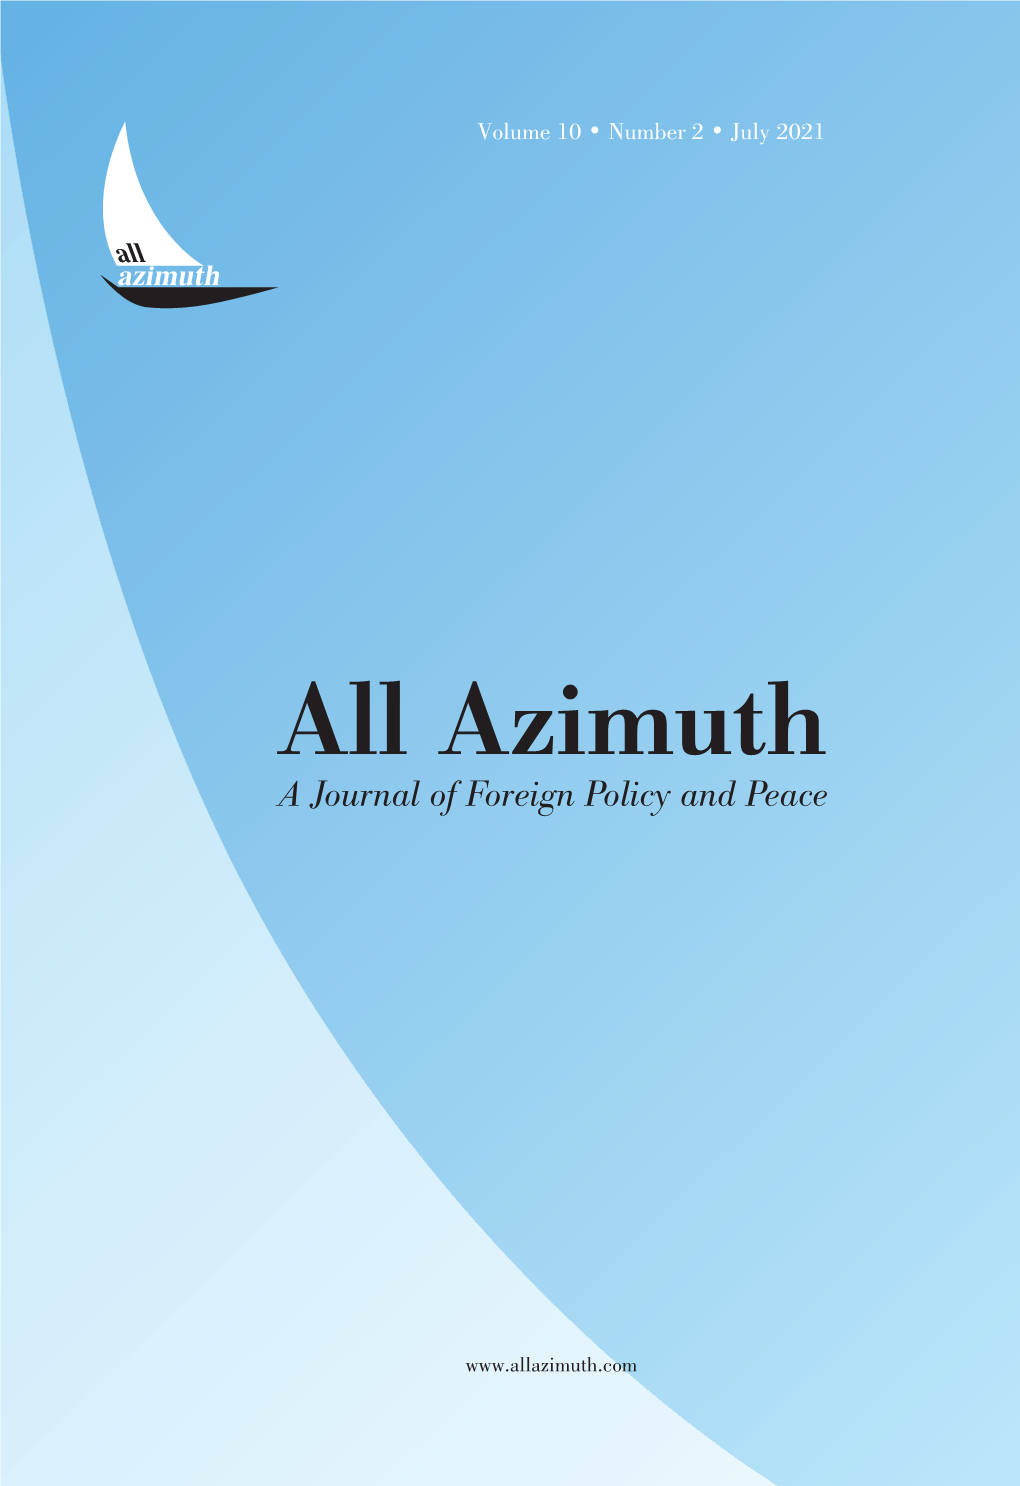 AZIMUTH: a Journal of Foreign Policy and Peace International Peer-Reviewed Journal, Published Biannually